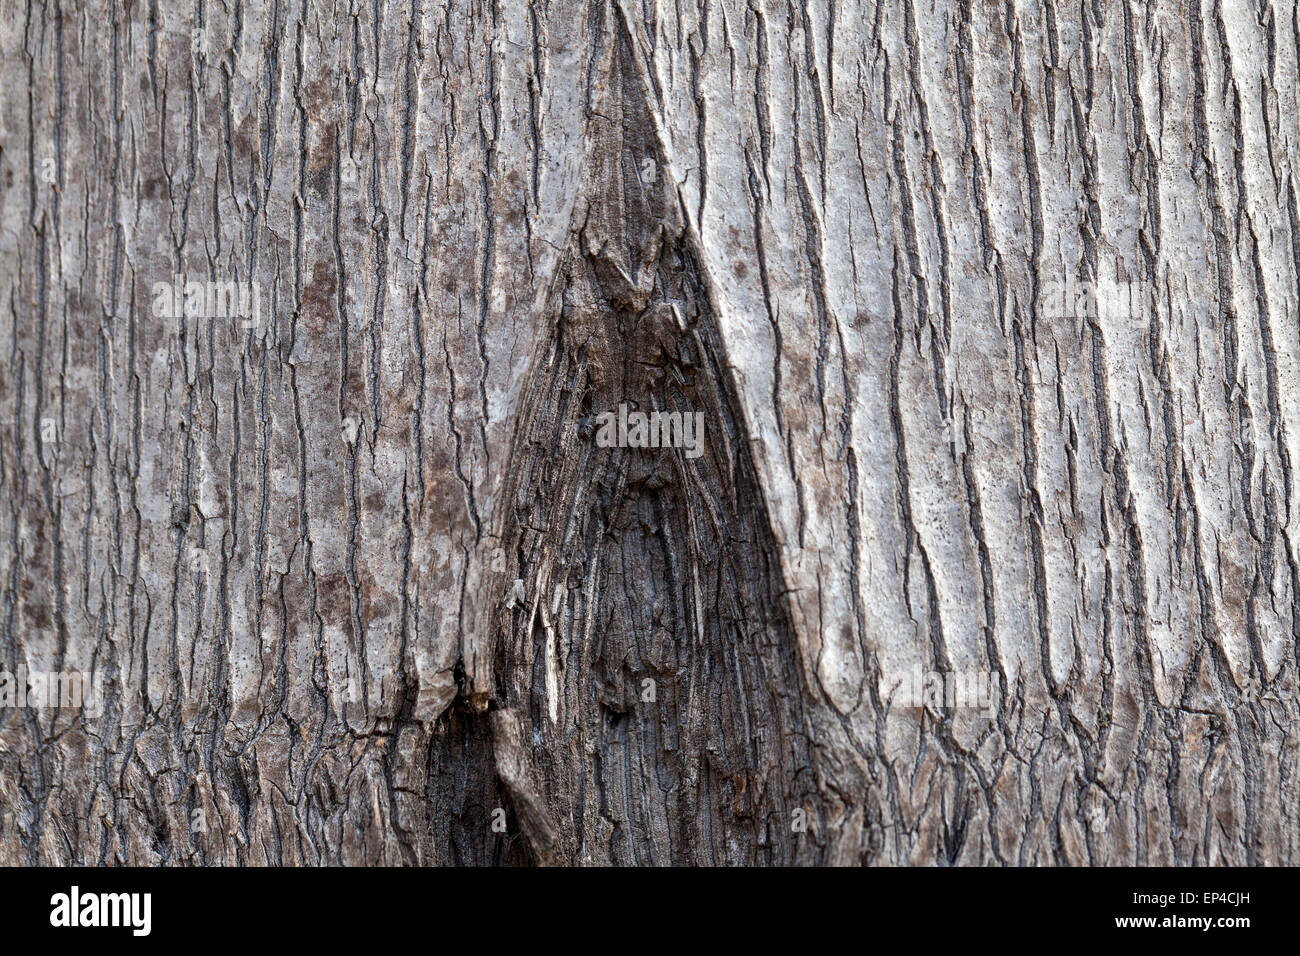 Patterns in the bark of a Queen Palm tree Stock Photo